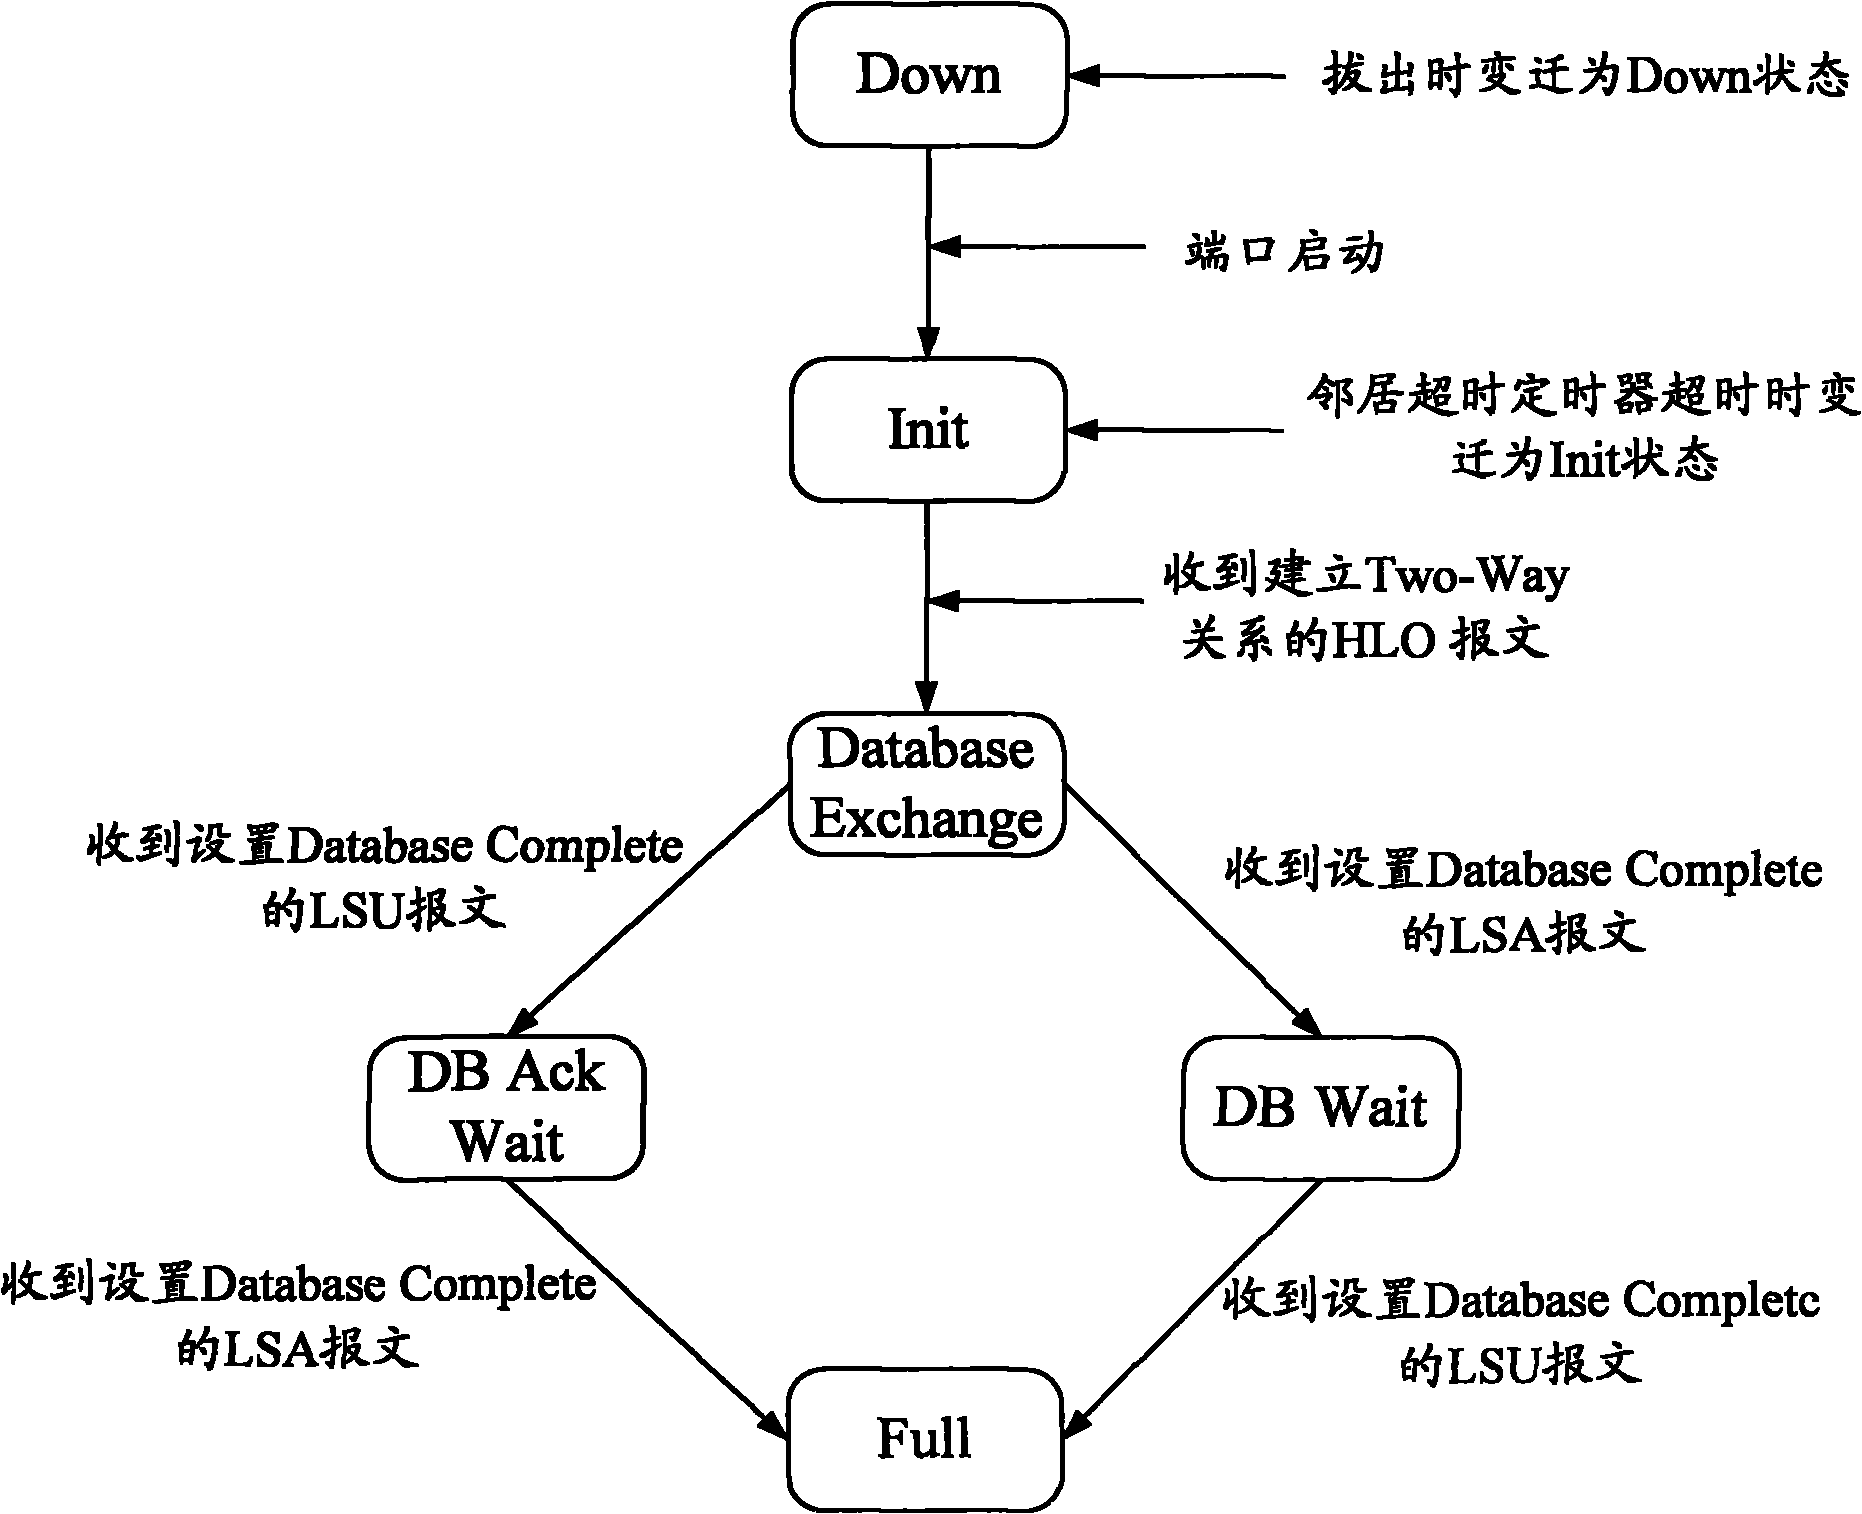 Method applied to FCoE (Fiber Channel over Ethernet) networking and used for optimizing FSPE (Fiber Shortest Path First) protocol and switchboards